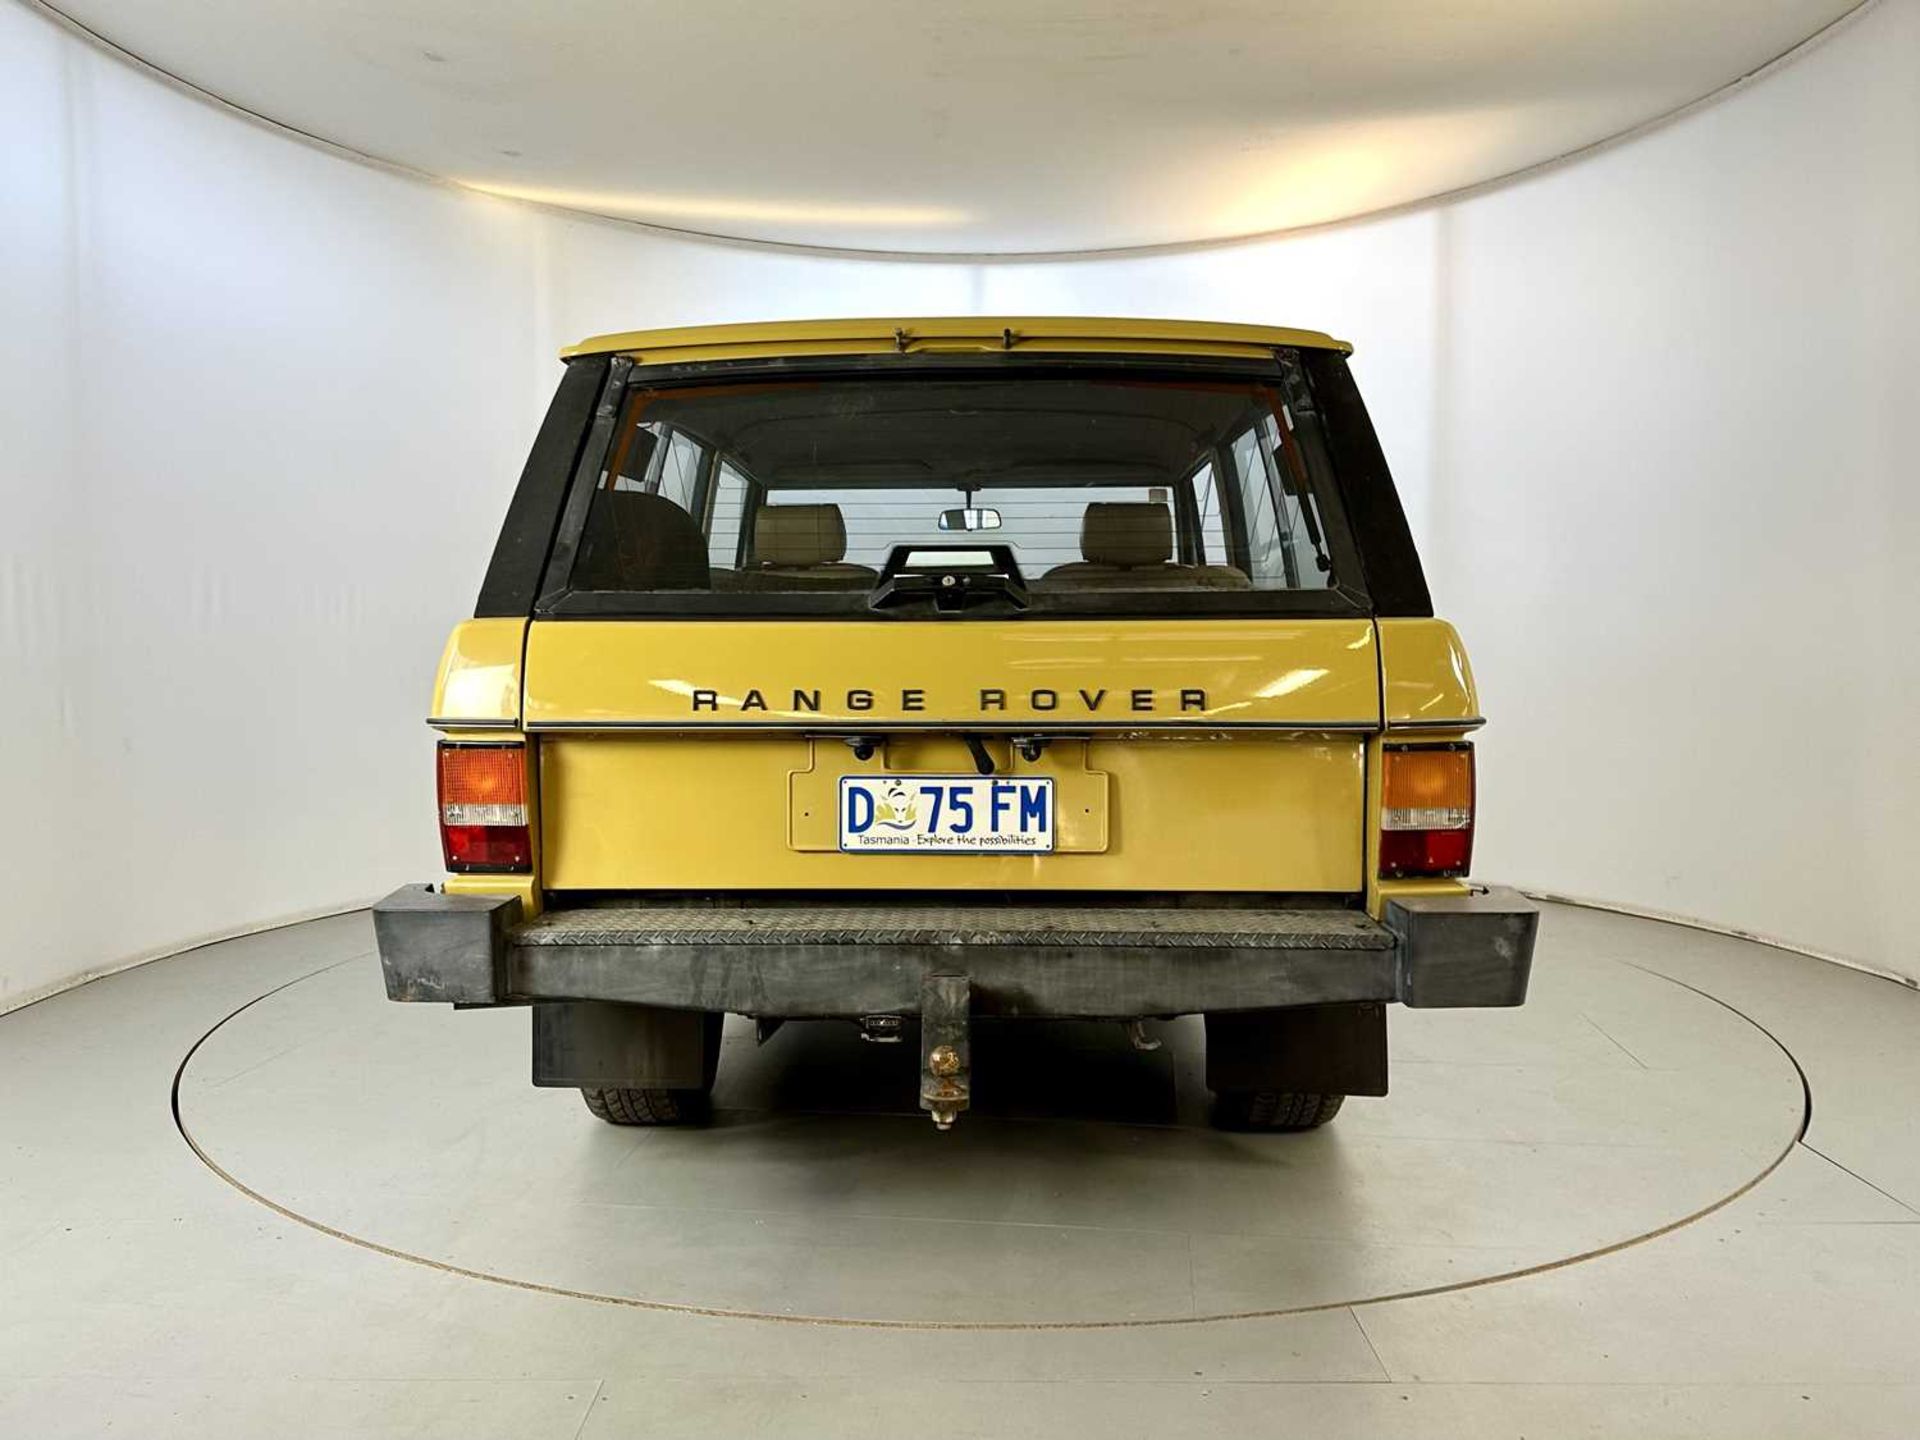 1974 Land Rover Range Rover Showing 26,000 miles from new - Image 8 of 29